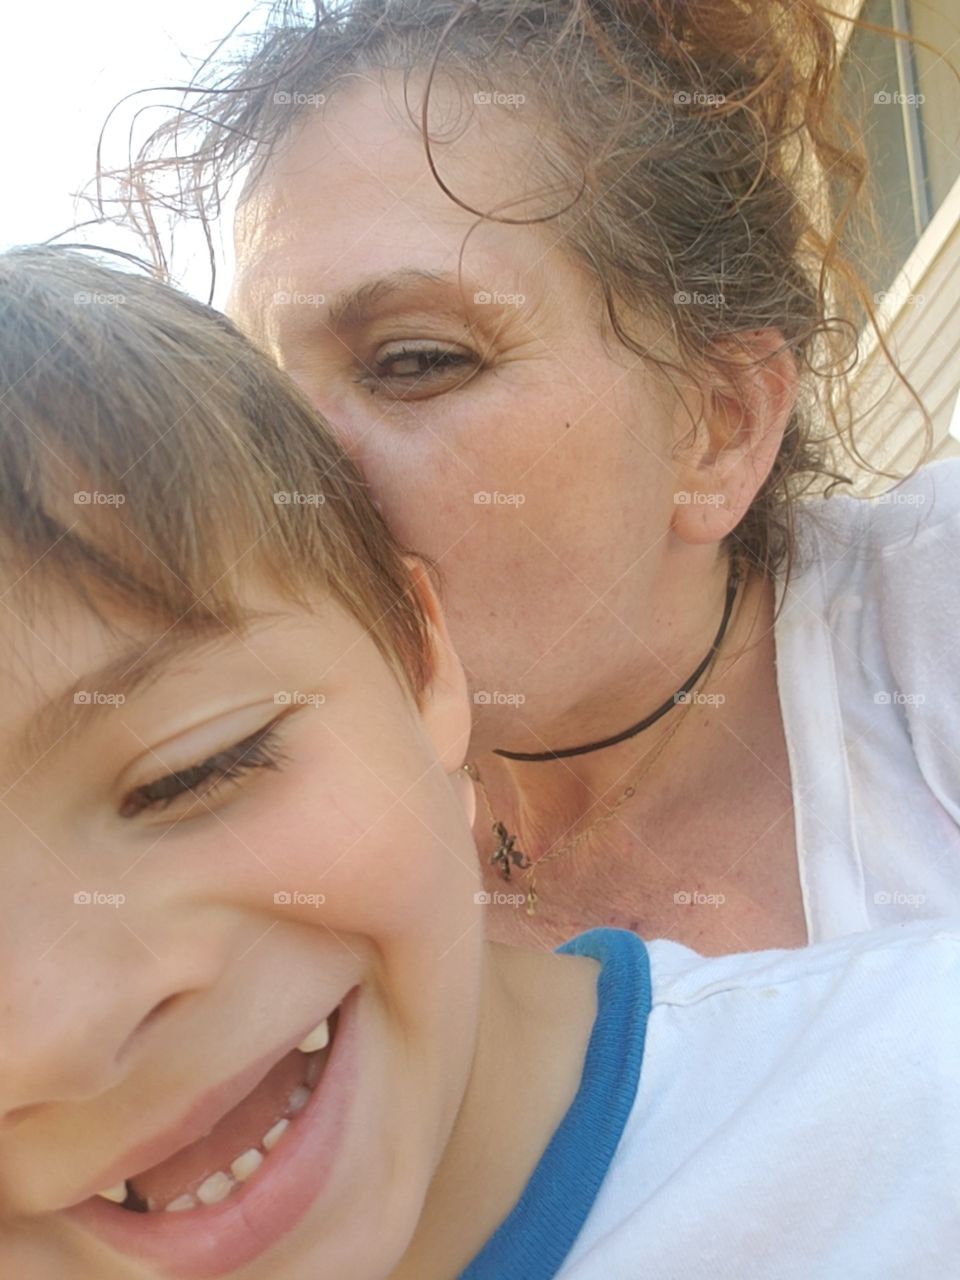 my son loves momma's kisses look at that handsome boy's smile.